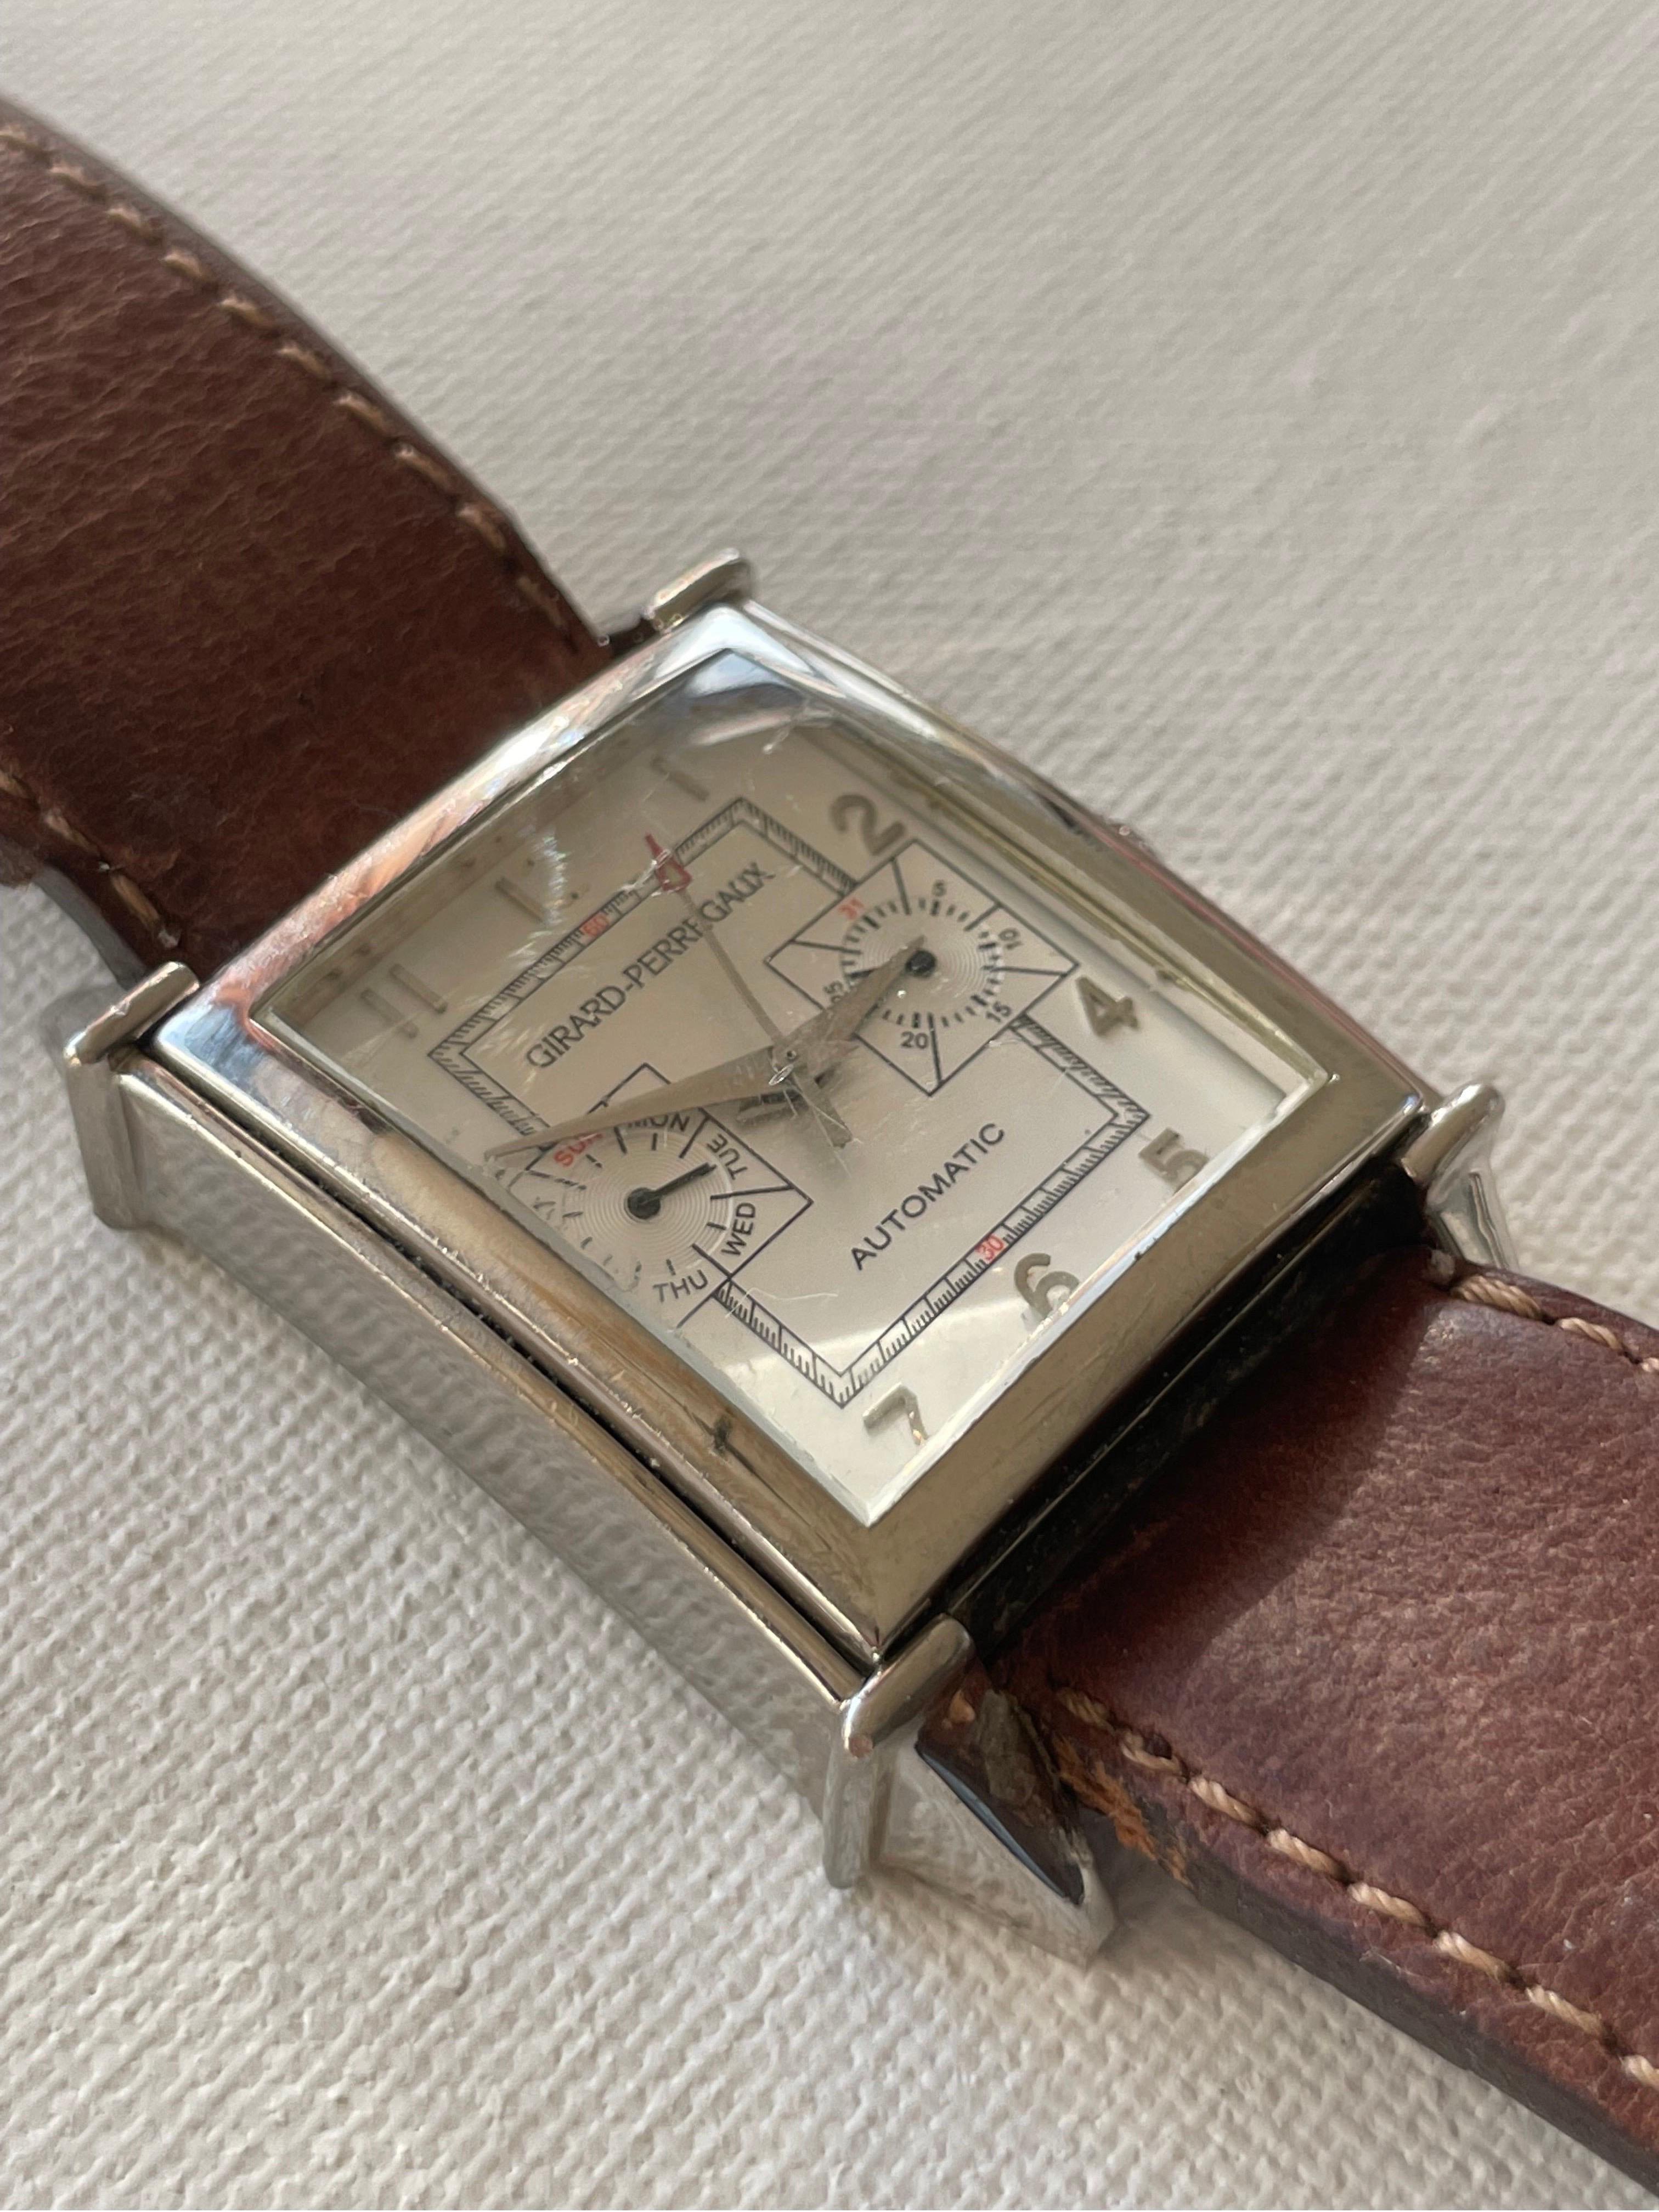 Mid-Century Modern Girard-Perregaux Time-Date Chronograph Automatic Wrist Watch Vintage, 1999 For Sale